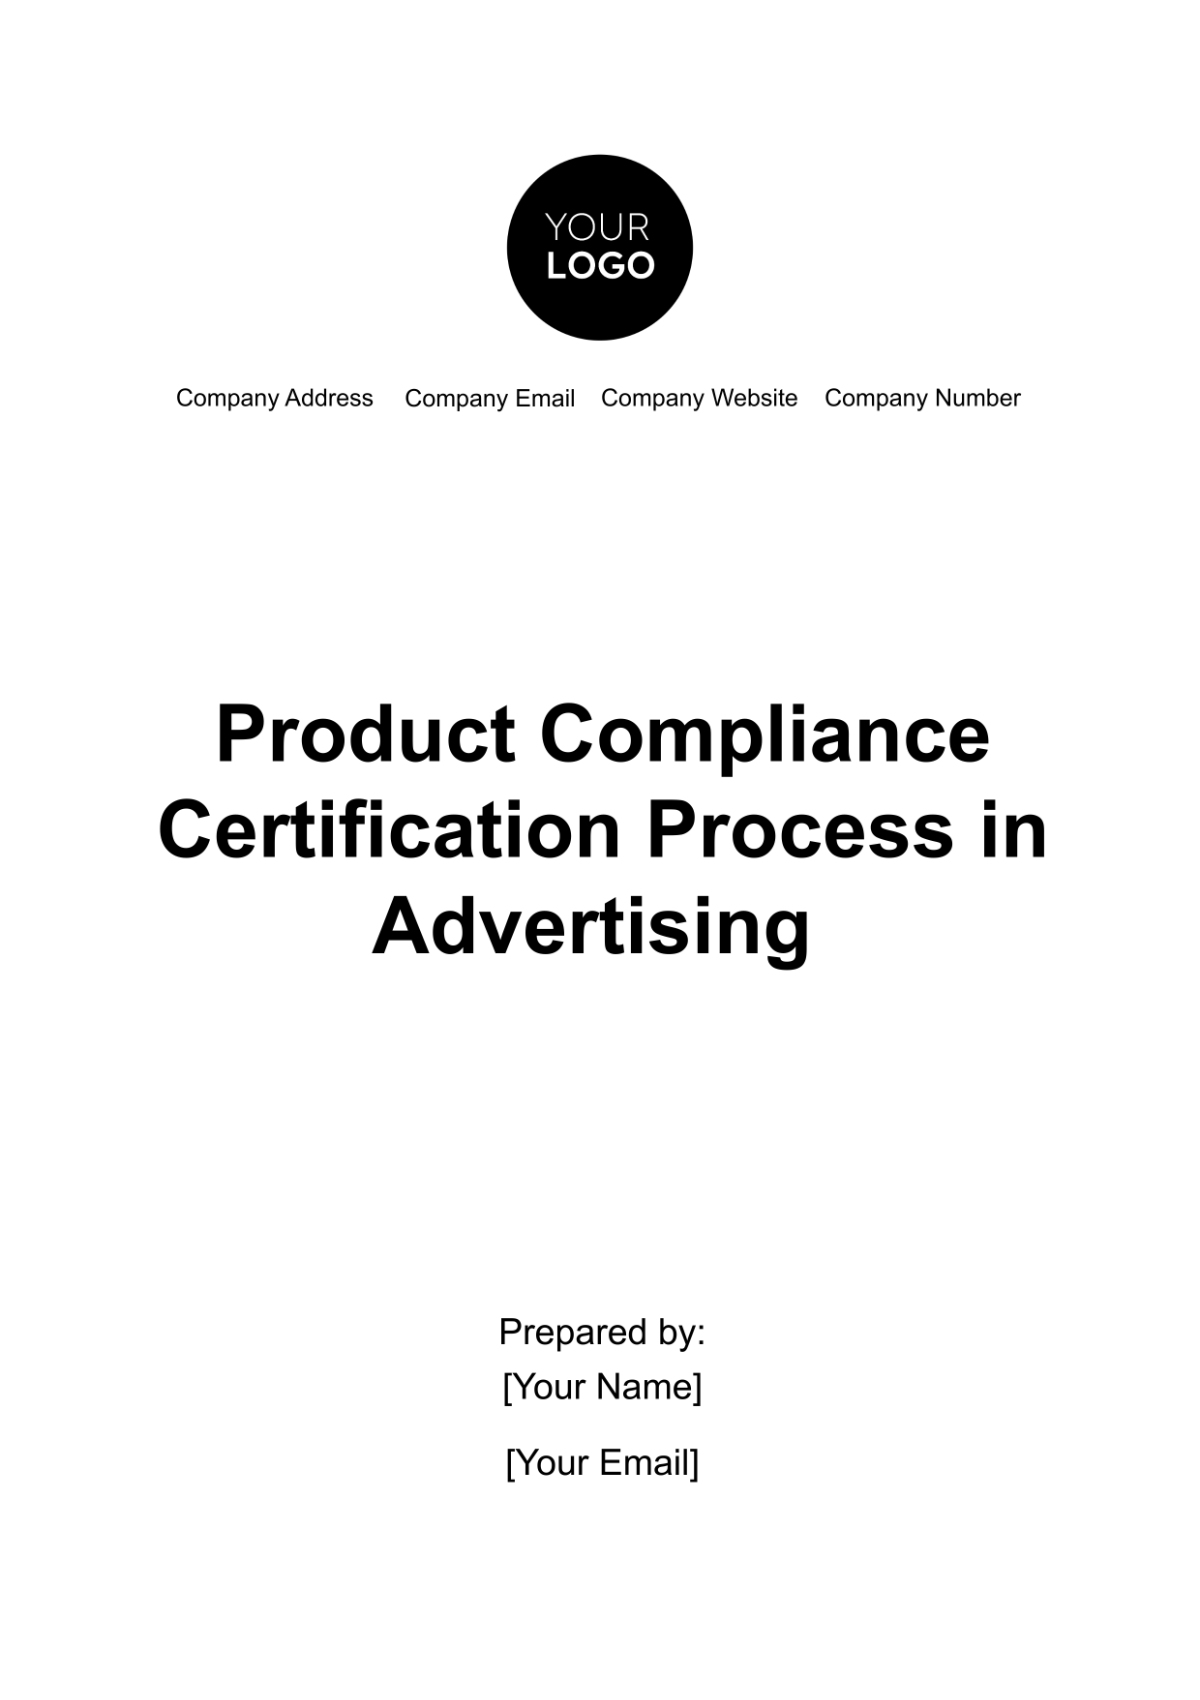 Product Compliance Certification Process in Advertising Template